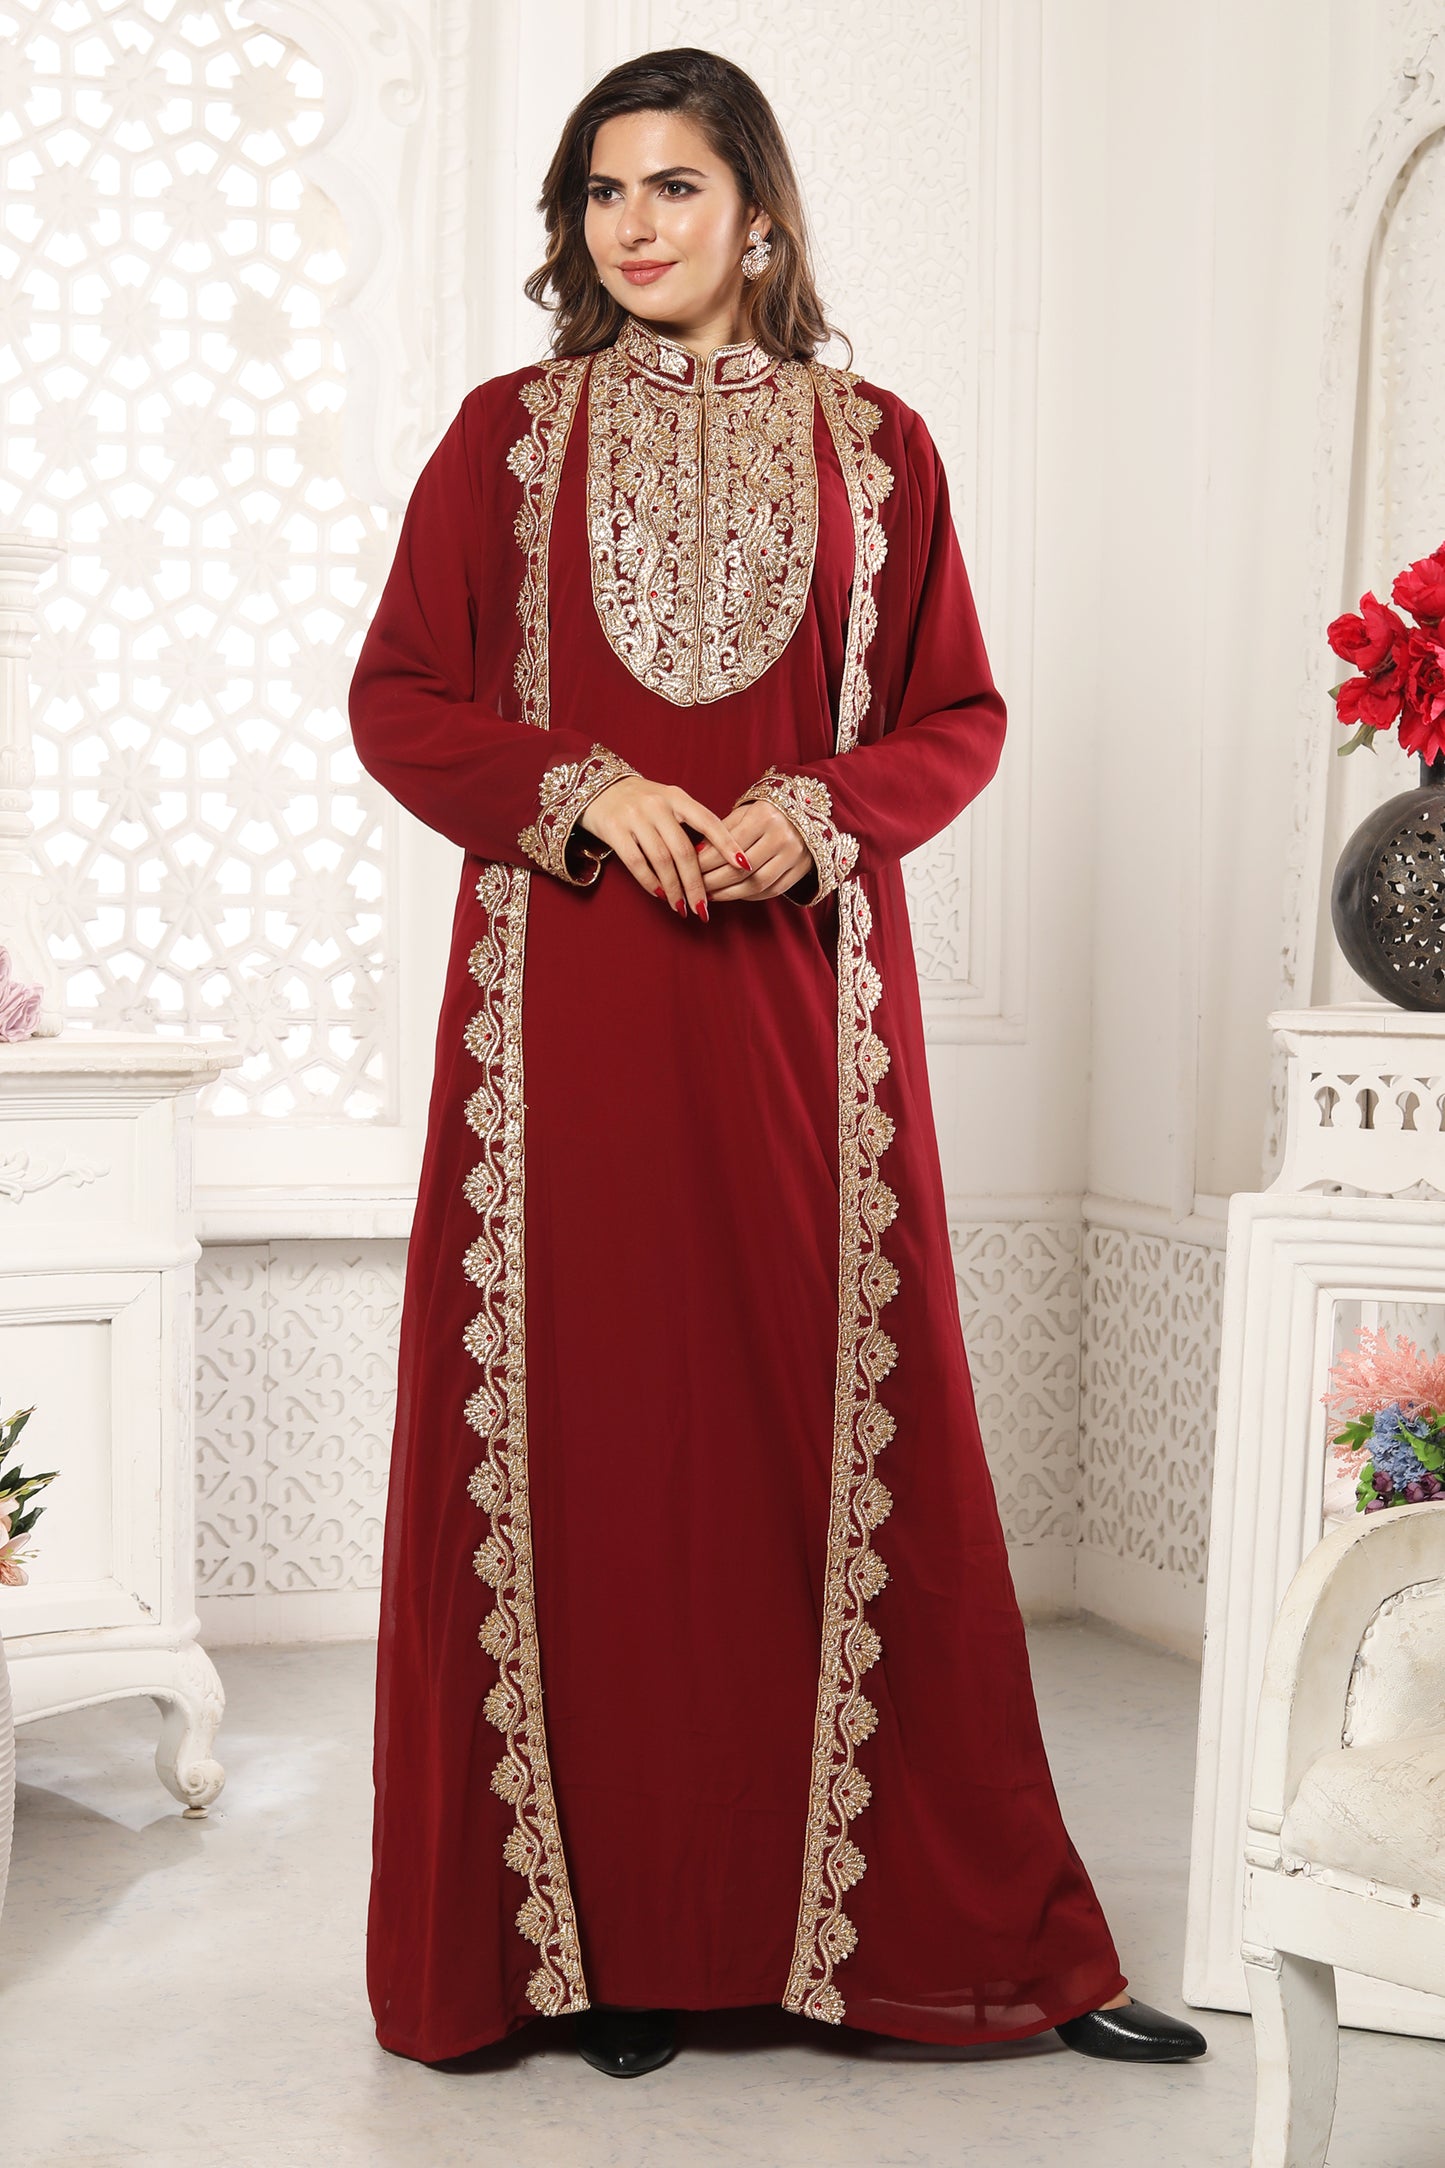 $52 - $64 - Embroidered Wedding Gowns, Embroidered Indian Wedding Gowns and Embroidered  Designer Outfits for Wedding Online Shopping